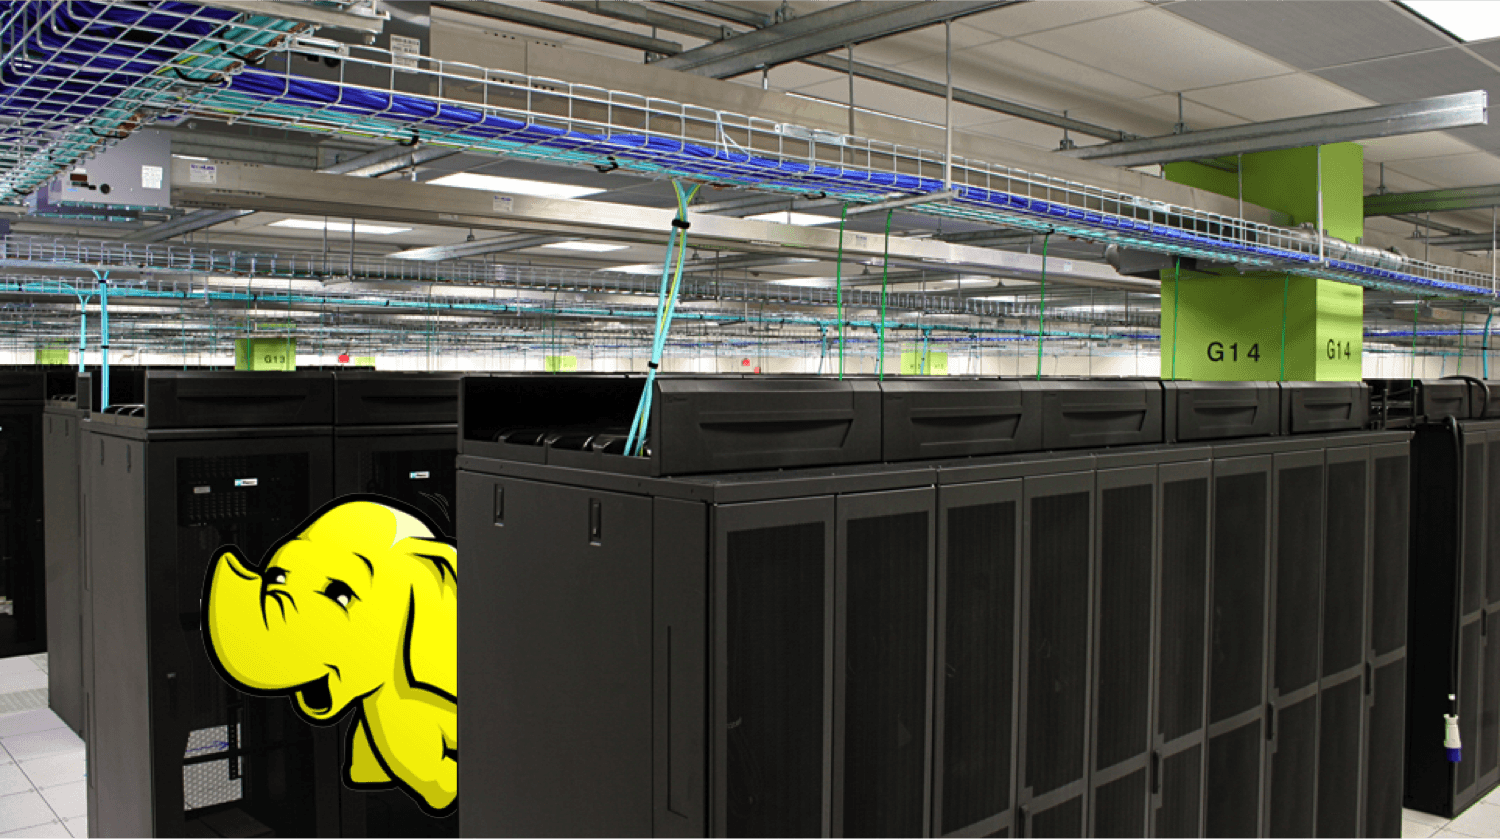 EMC Server Logo - Help! There's a yellow elephant in my server room!